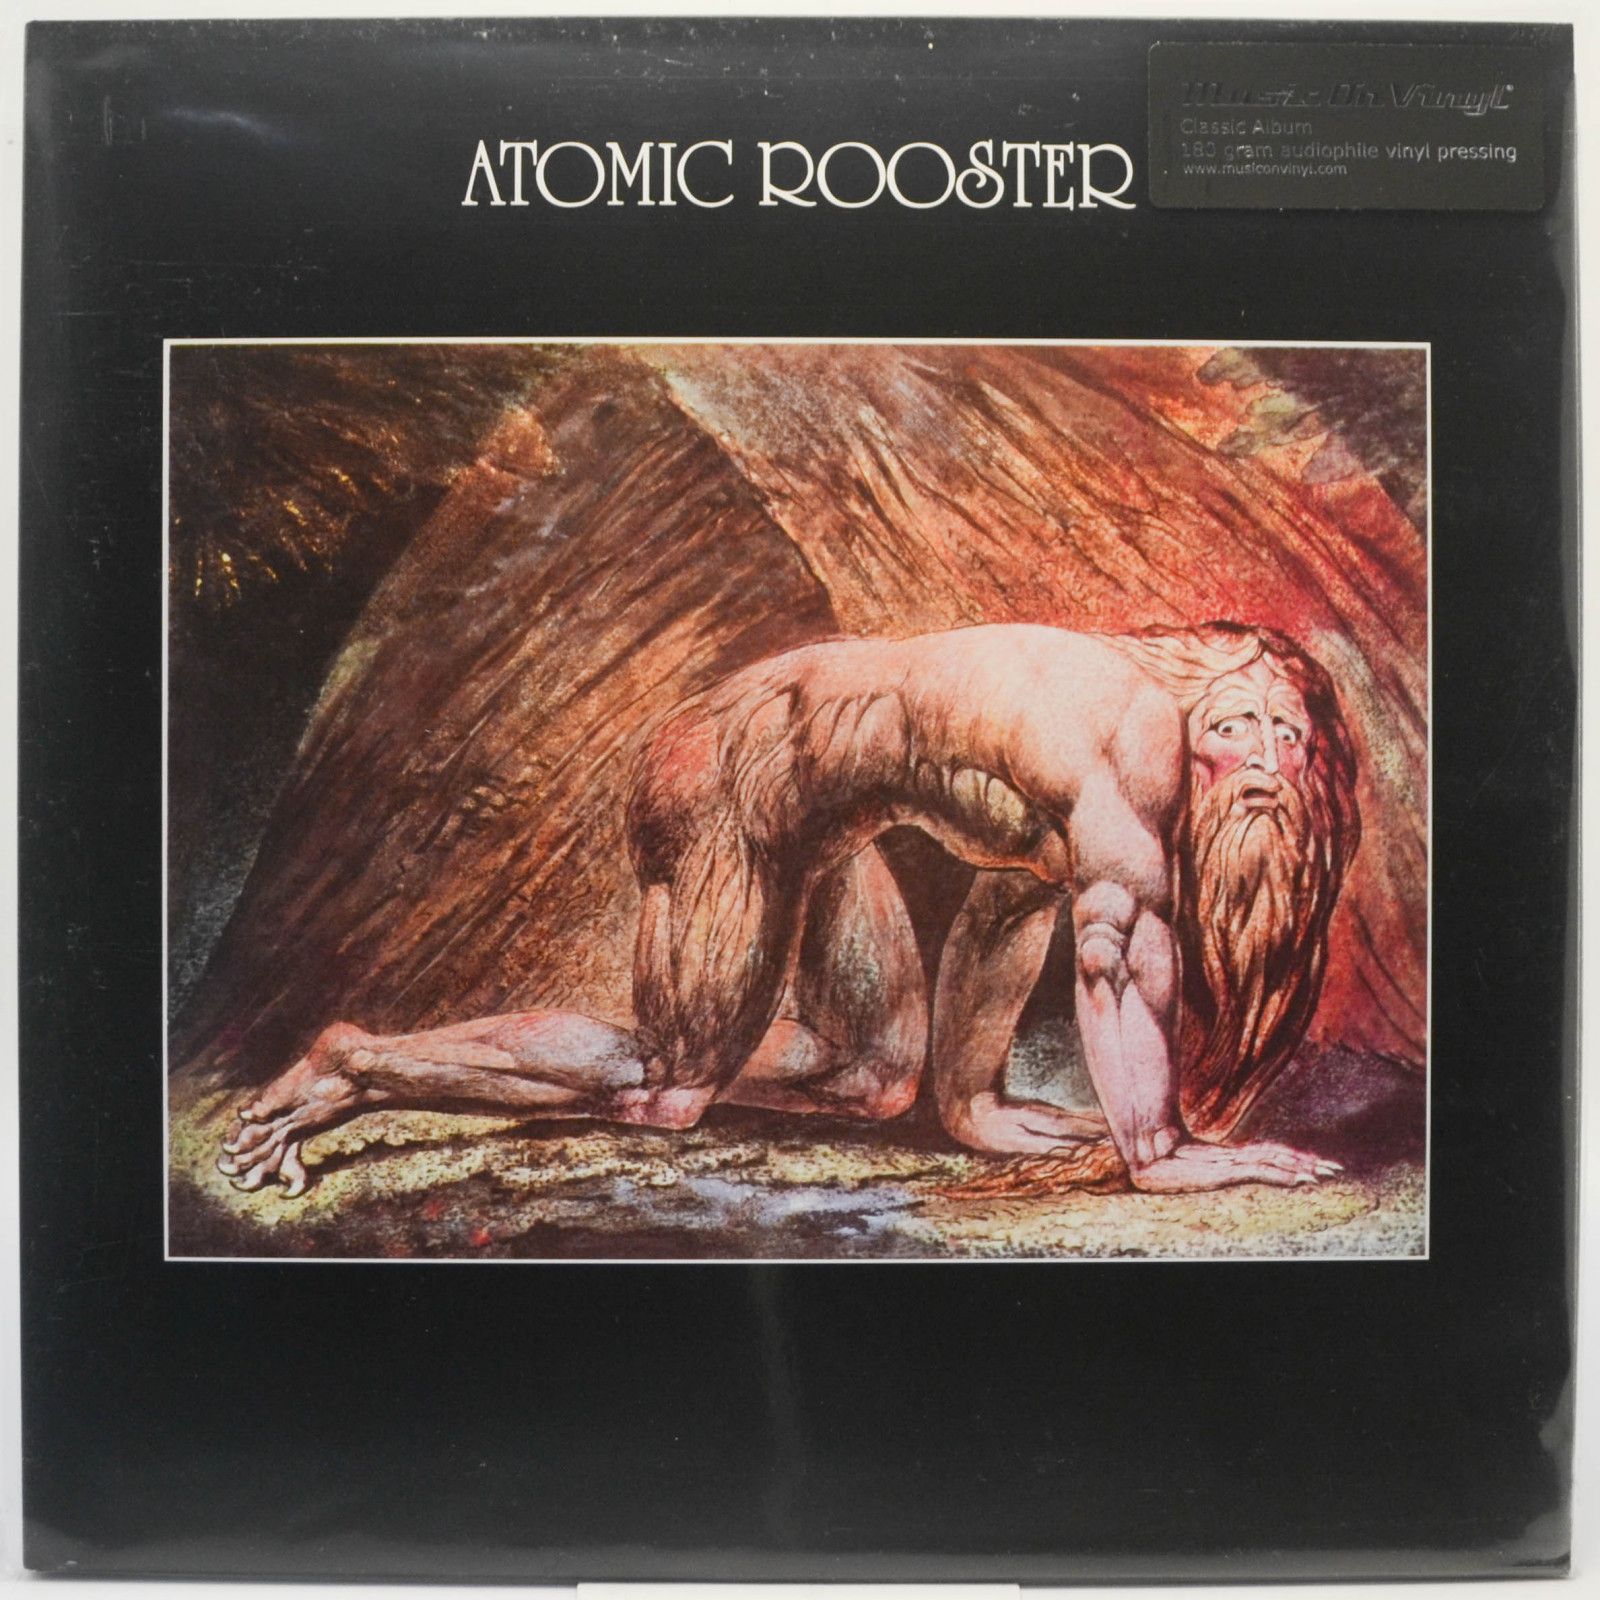 Atomic Rooster — Death Walks Behind You, 1970